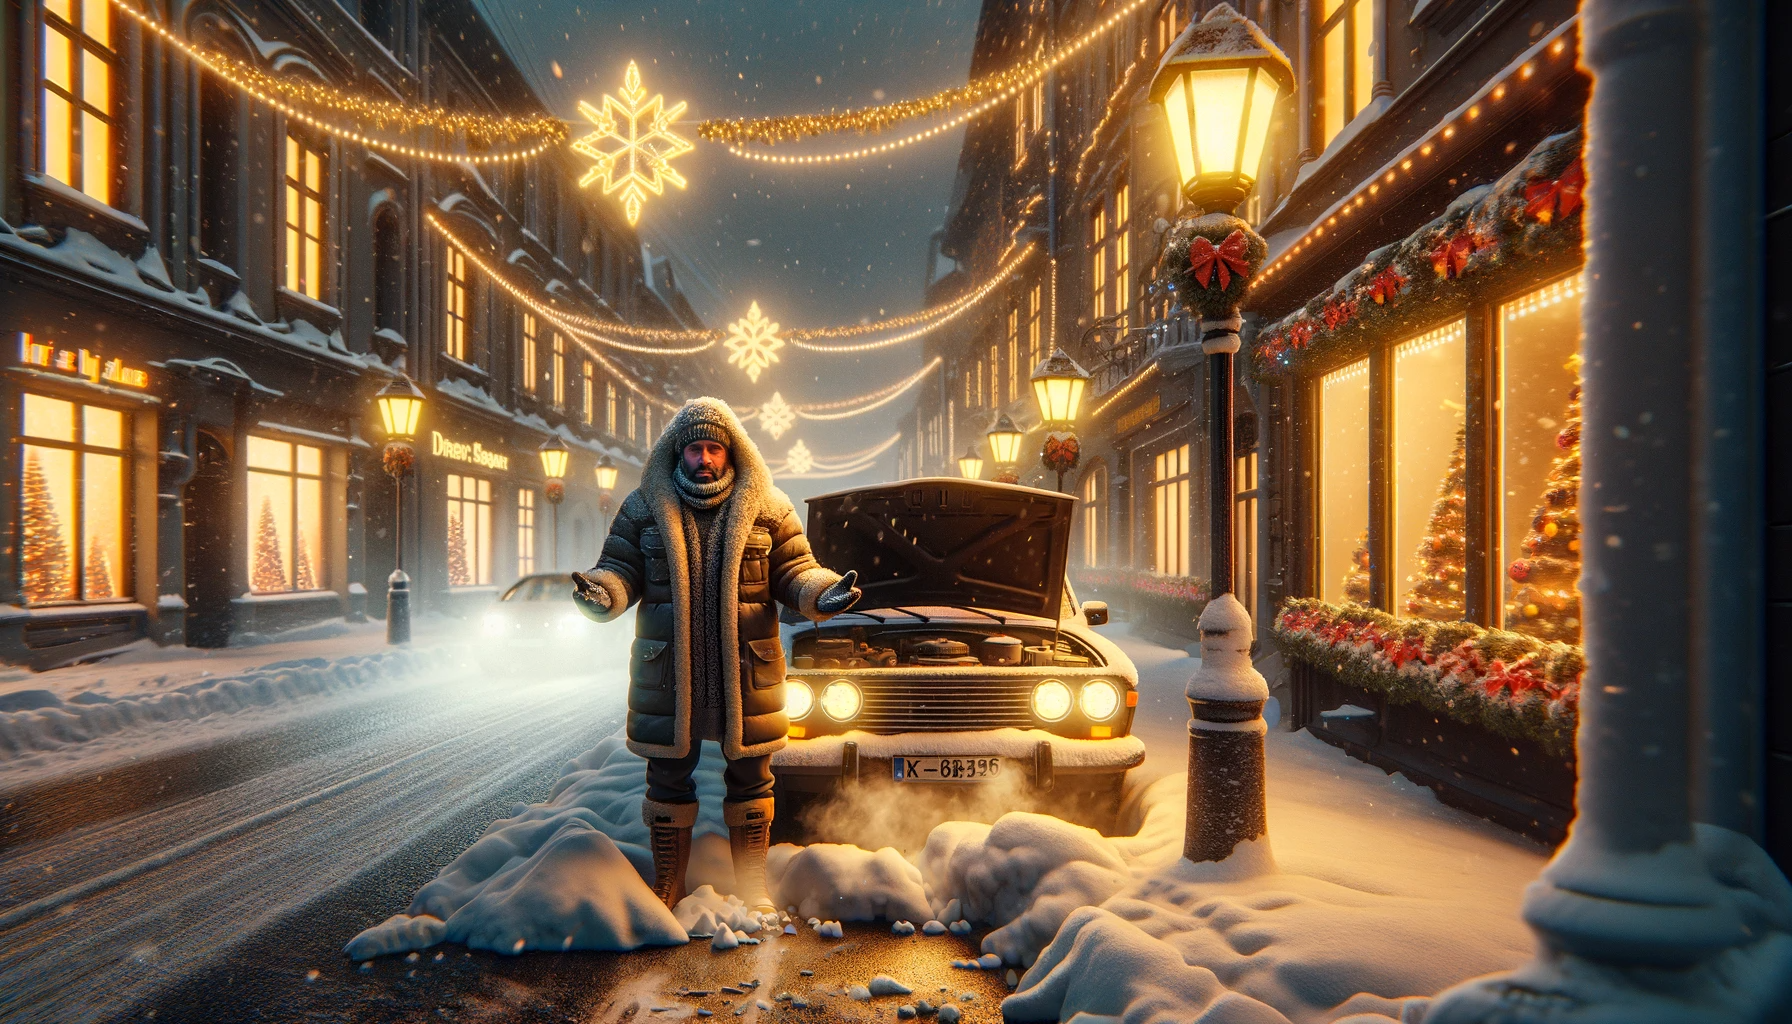 dall_e_2023-12-19_13_12_03_a_winter_scene_on_a_snowy_street_illuminated_by_yellow_streetlights_with_snow_falling_the_shop_windows_showcase_christmas_decorations_and_the_stree.png